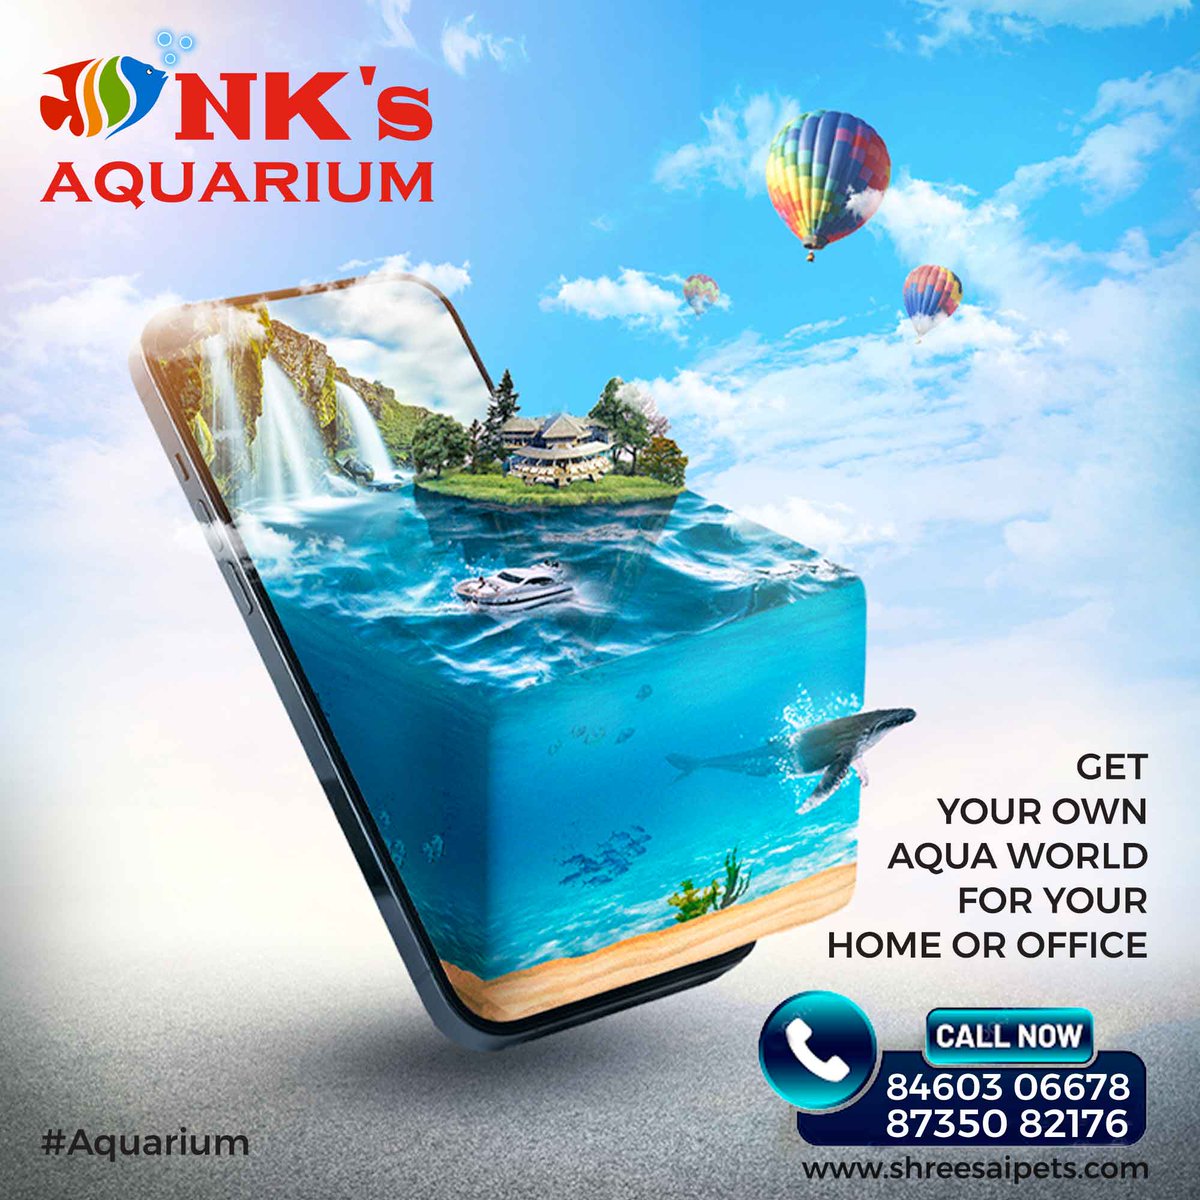 GET YOUR OWN AQUA WORLD FOR YOUR HOME OR OFFICE !!
Call on 8460306678 or 87350 82176

#CustomAquarium #SmallStart #SmallAquarium #AquaWorld #Aquarium #CustomAquarium #HomeAquarium #AquariumPlants #LivePlants #OfficeAquarium #Underwater #UnderwaterWorld #AquariumShop #NKsAquarium